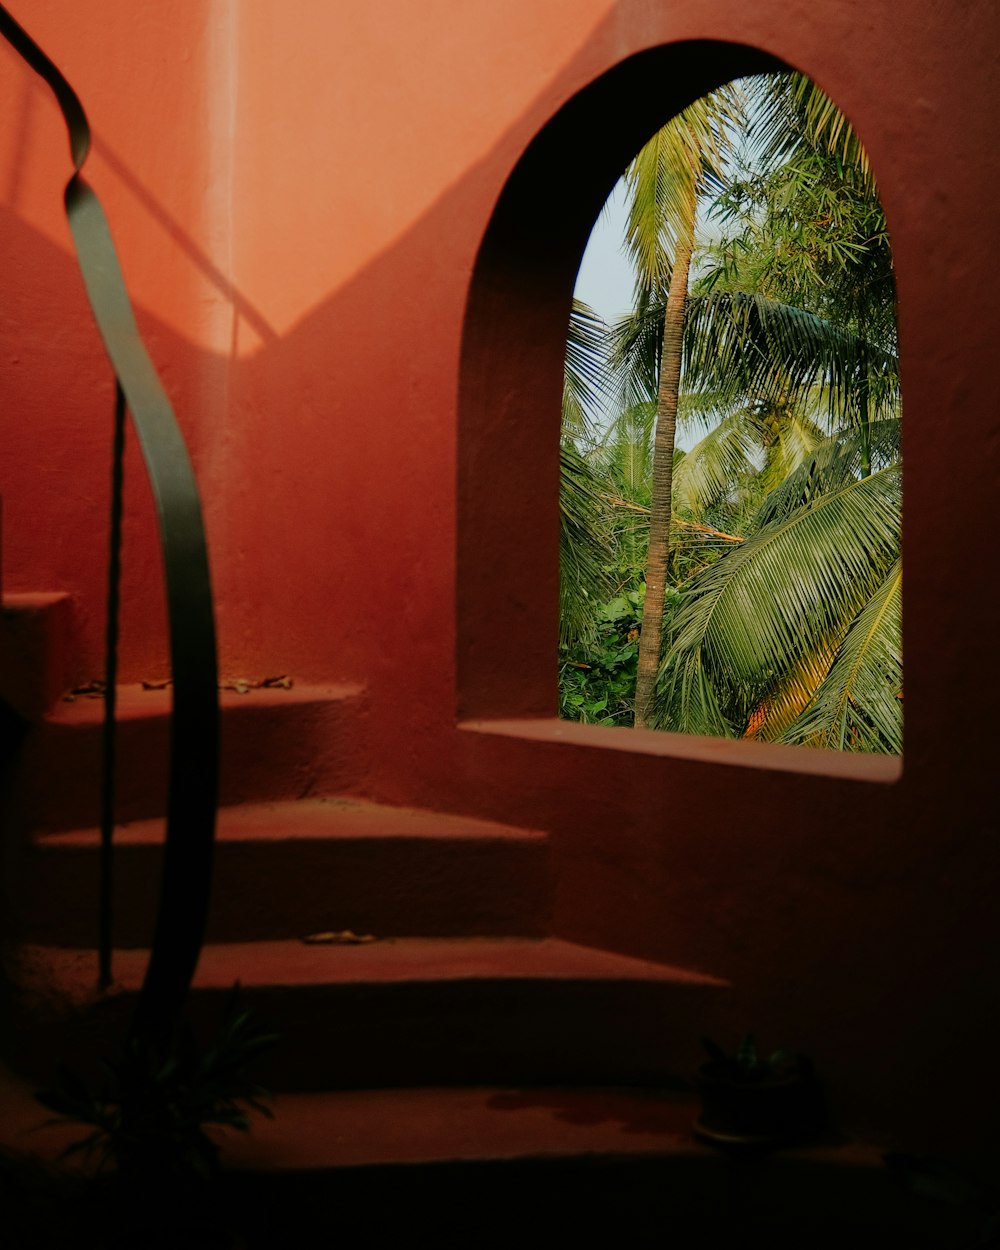 a view of a palm tree through a window